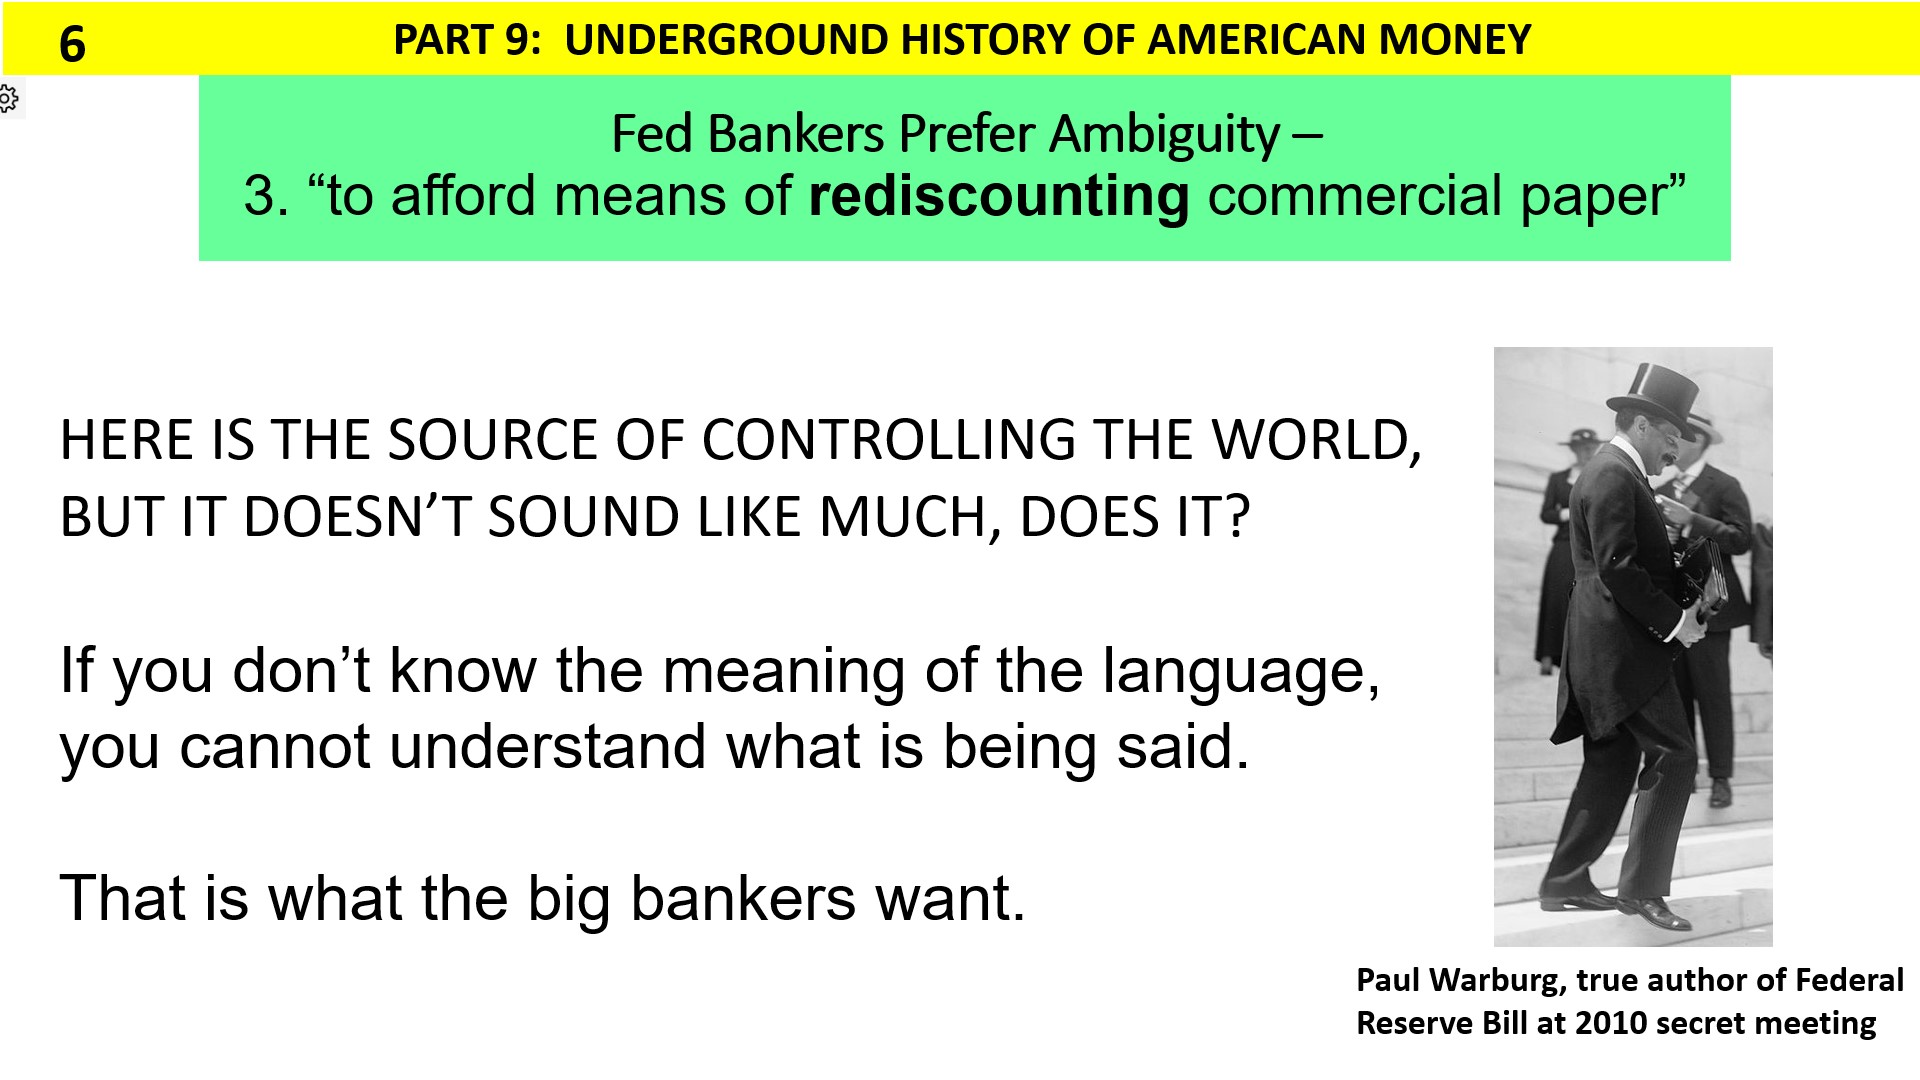 To afford means of rediscounting commercial paper